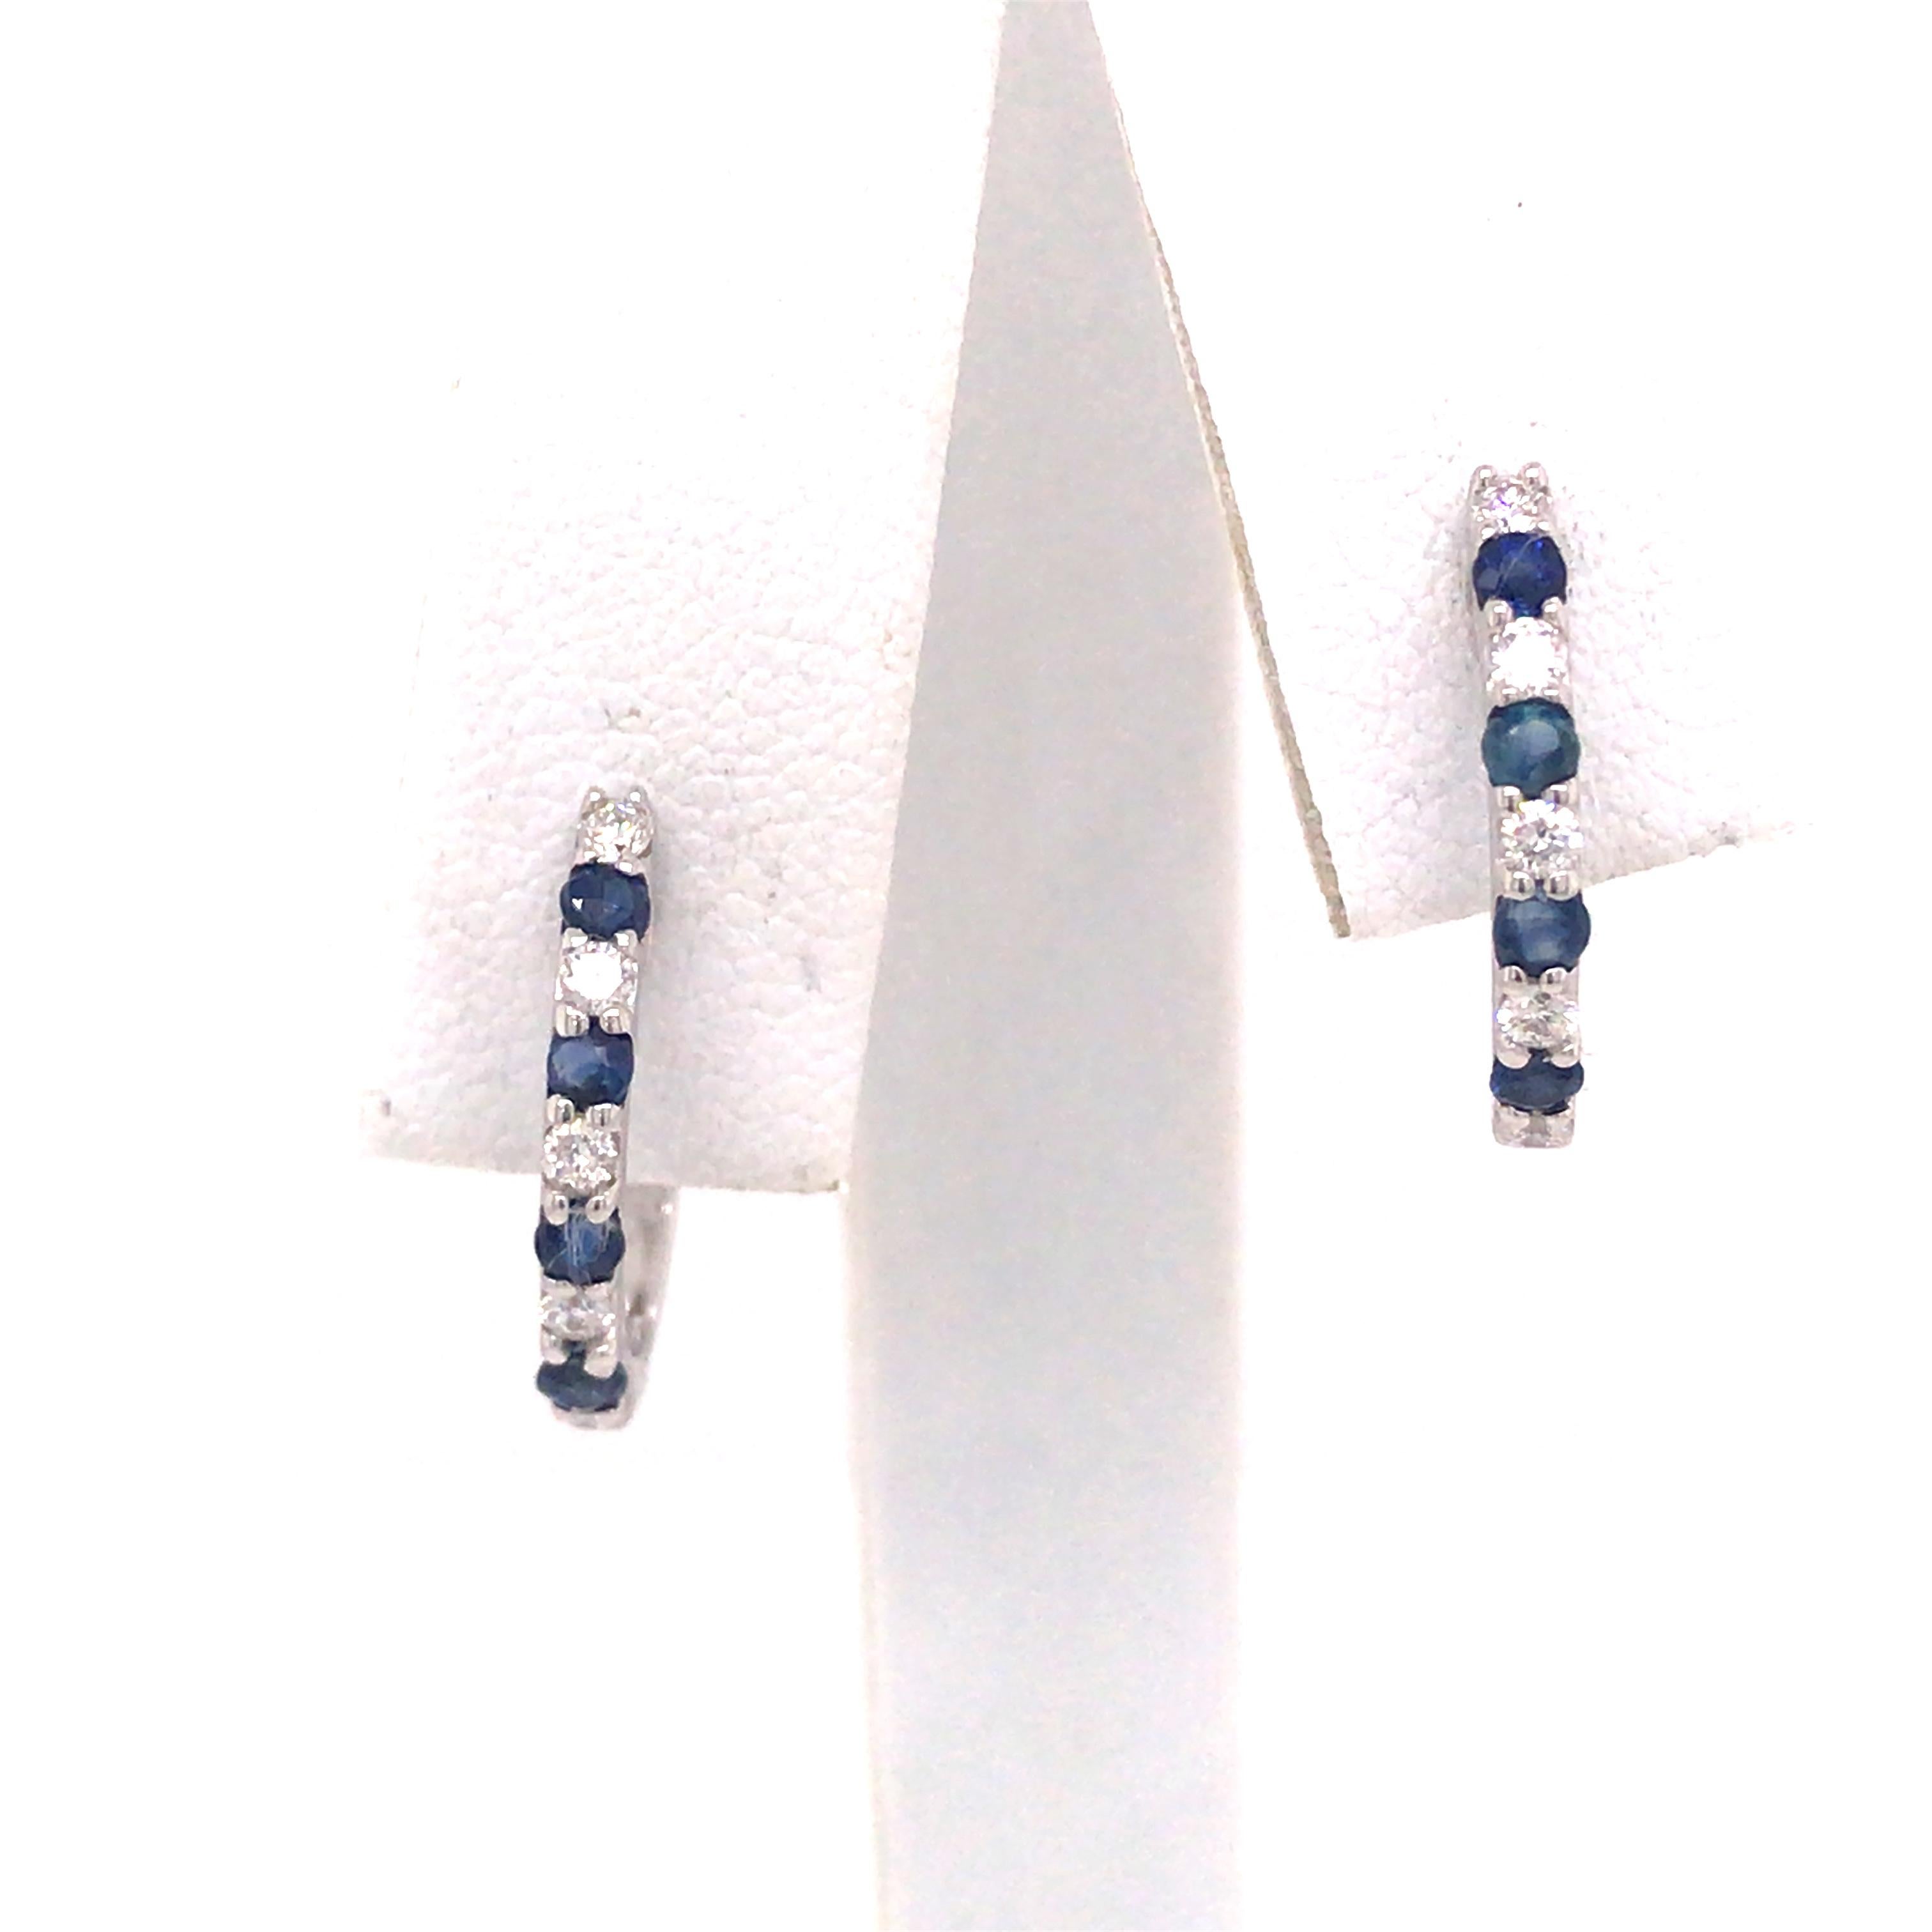 Diamond and Sapphire Huggie Earrings in 14K White Gold.  Round Brilliant Cut Diamonds weighing .18 carat total weight, G-H in color and VS-SI in clarity are expertly set alternating with Sapphire Gemstones.  The Earrings measure 5/8 inch in